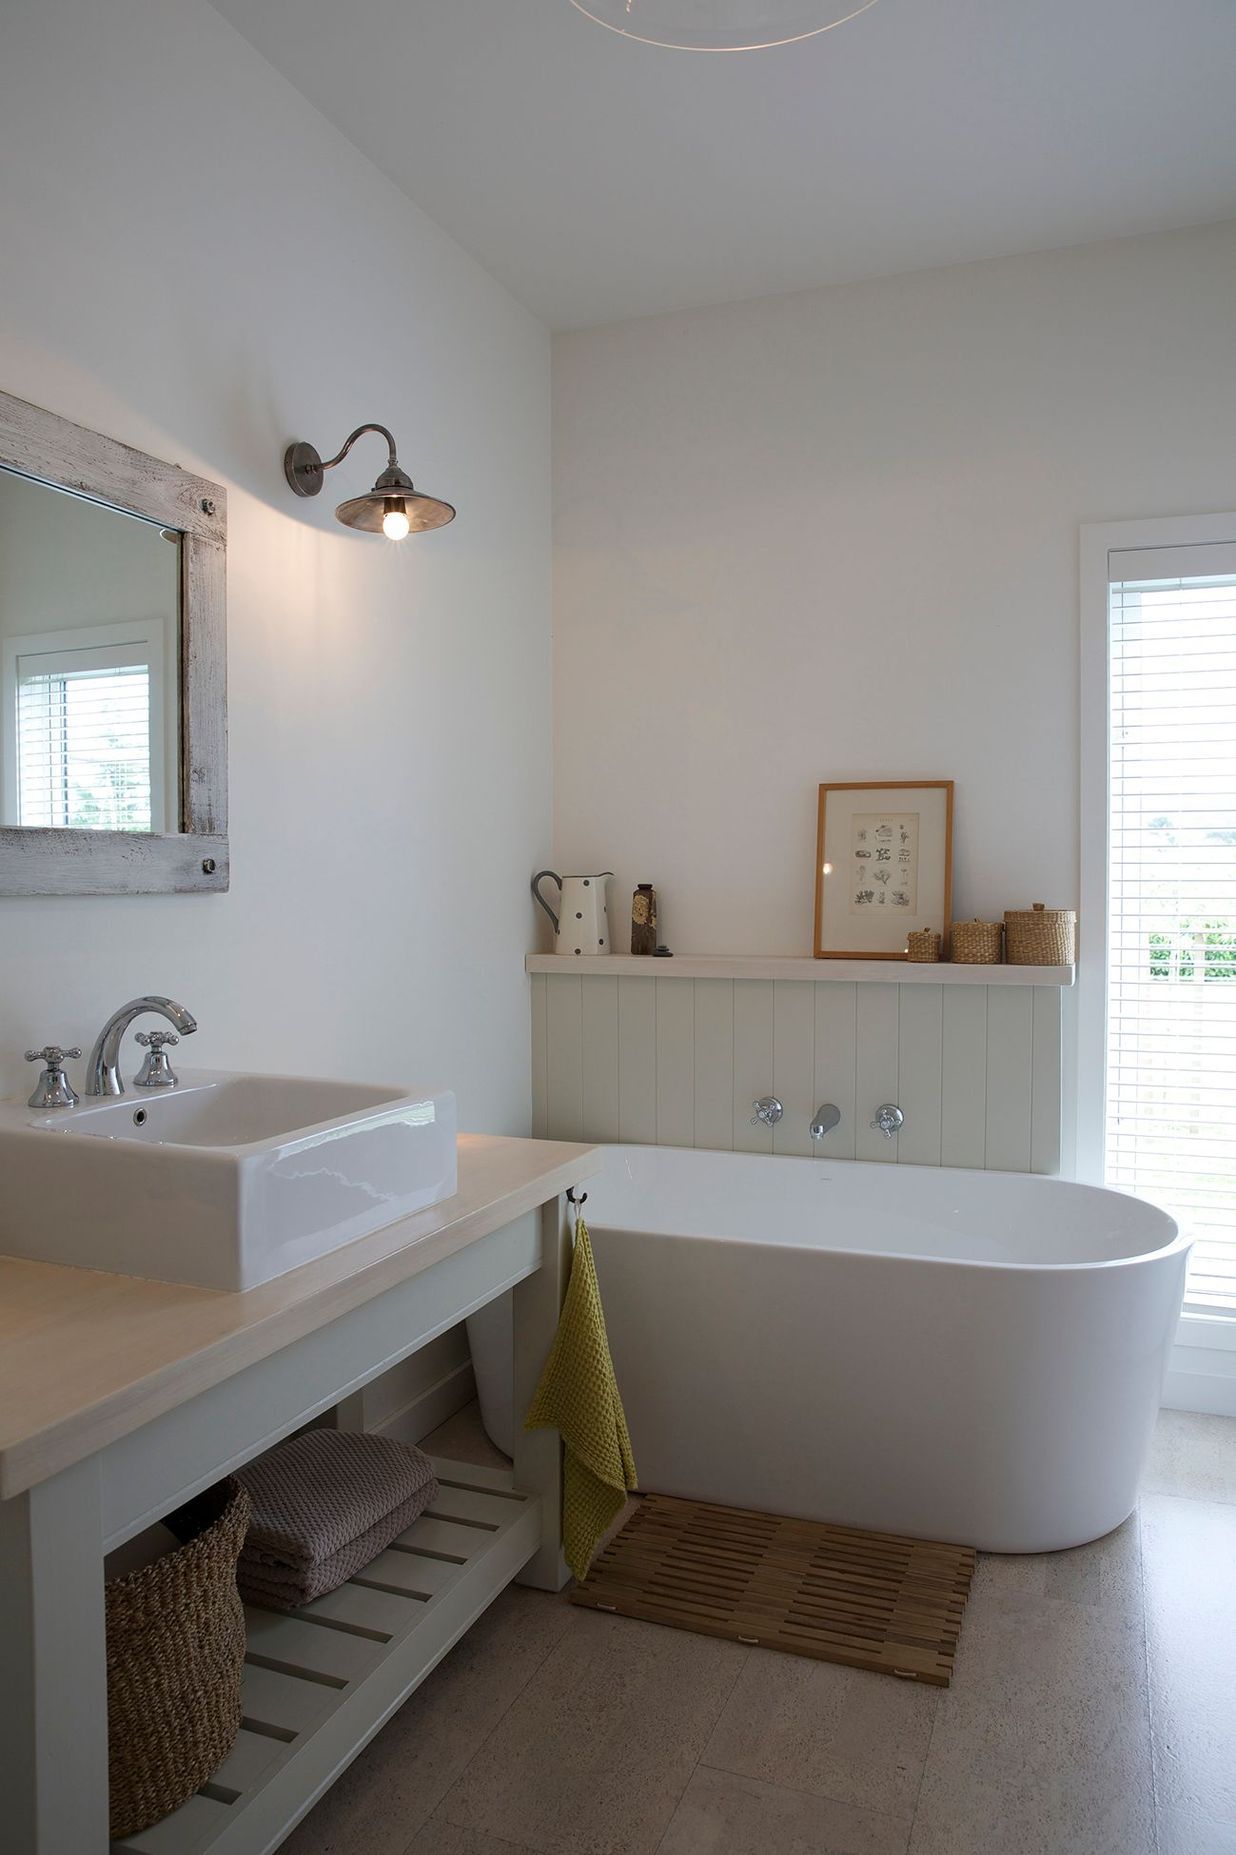 Cork flooring flows through into the bathroom, providing a great water resistant surface.